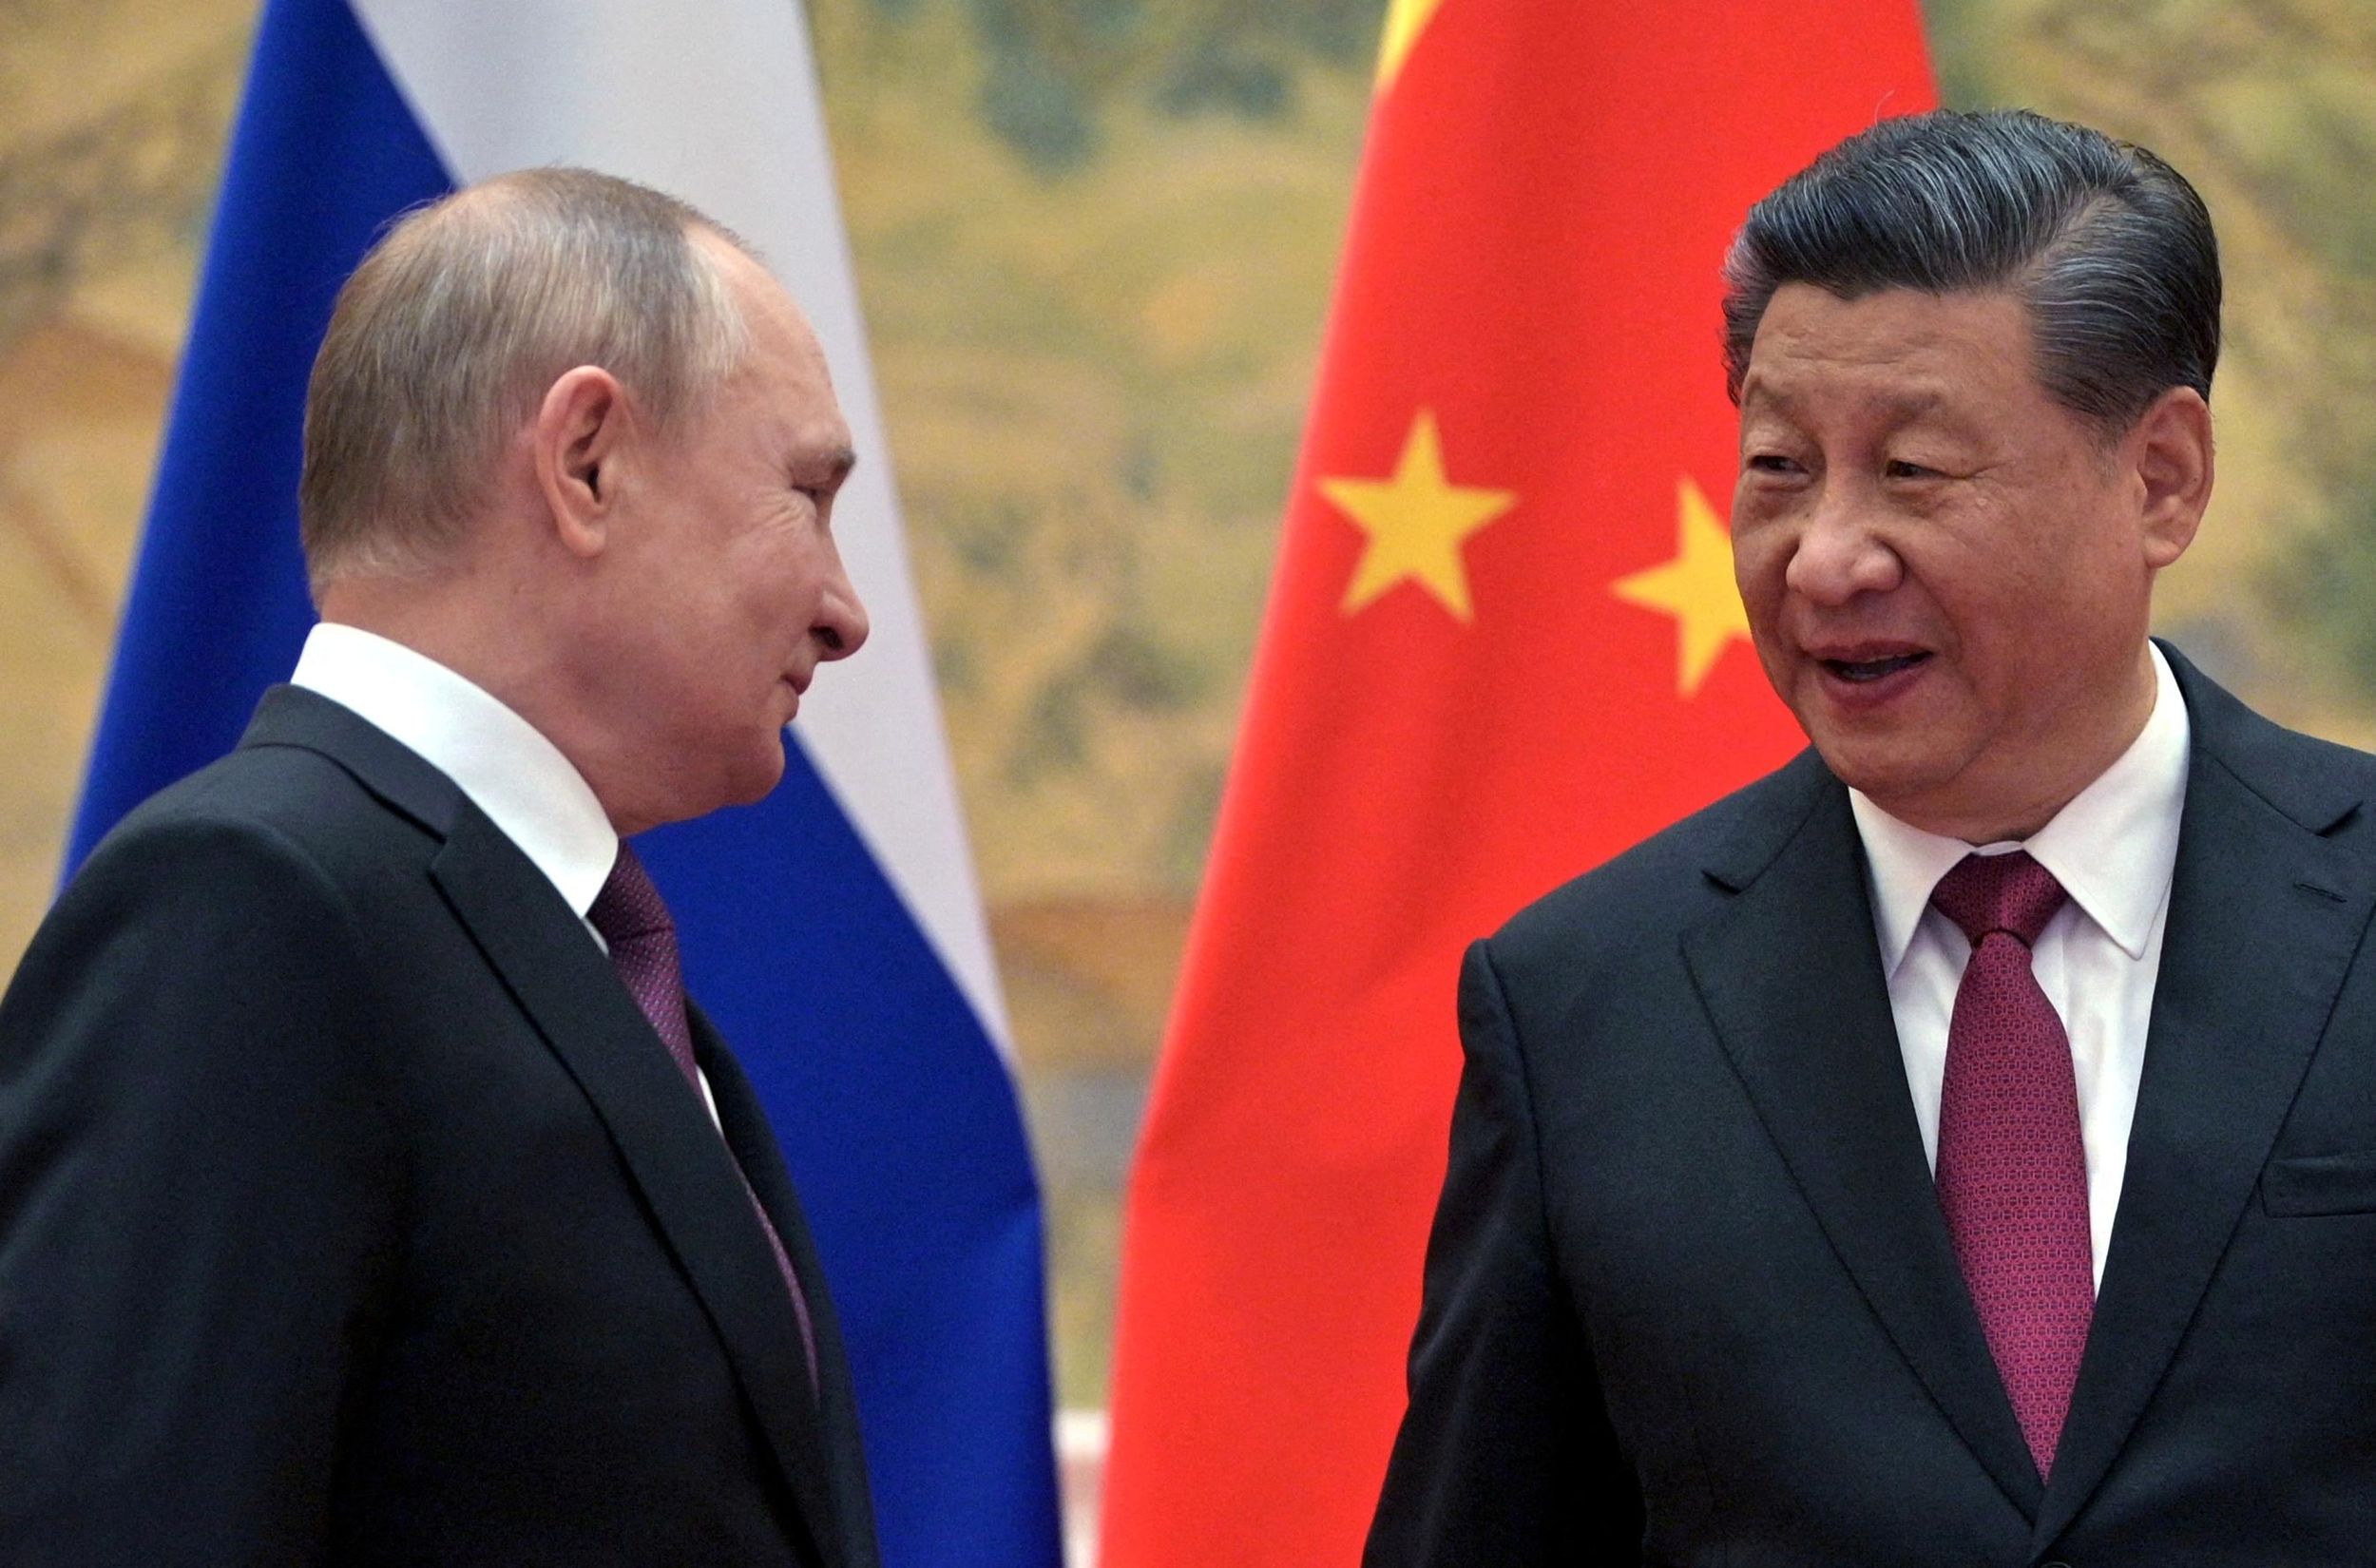 Ukraine throws wrench into China-Russia friendship